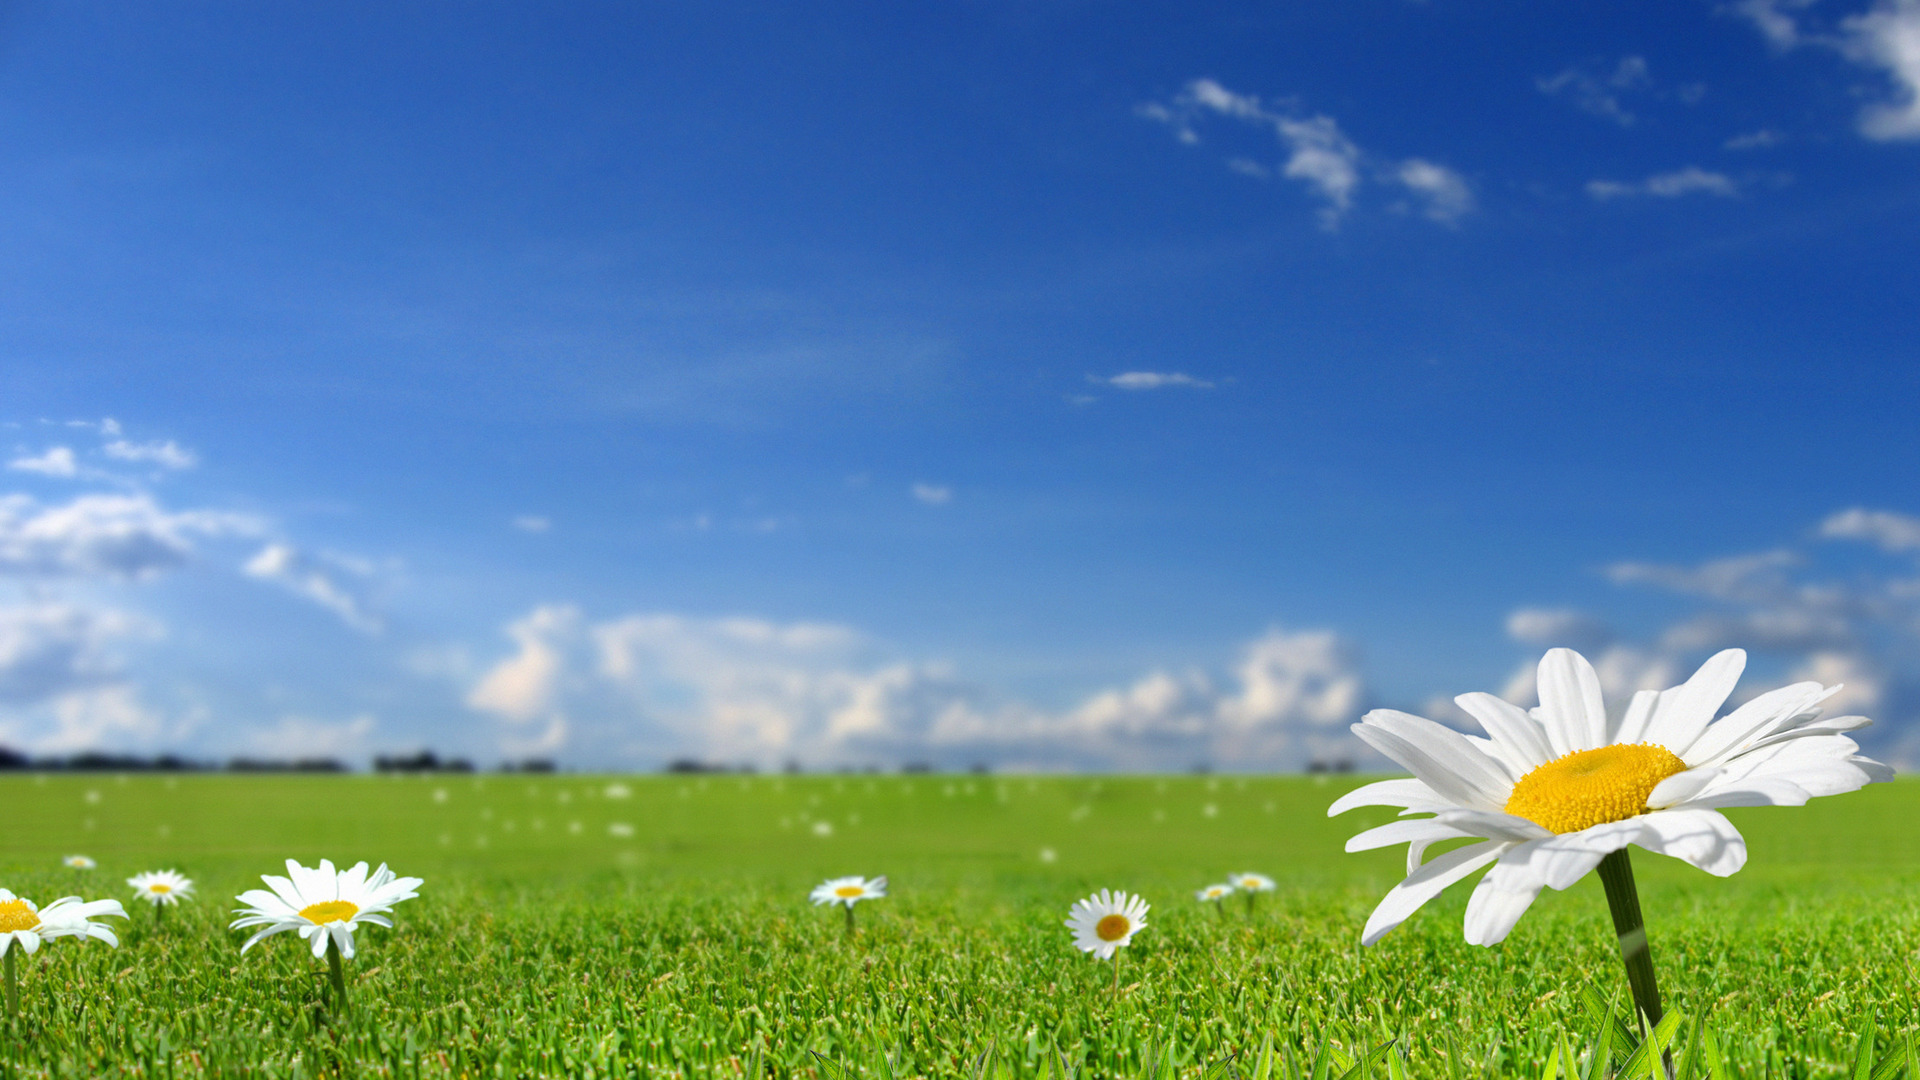 Daisies In The Green Grass Wallpaper